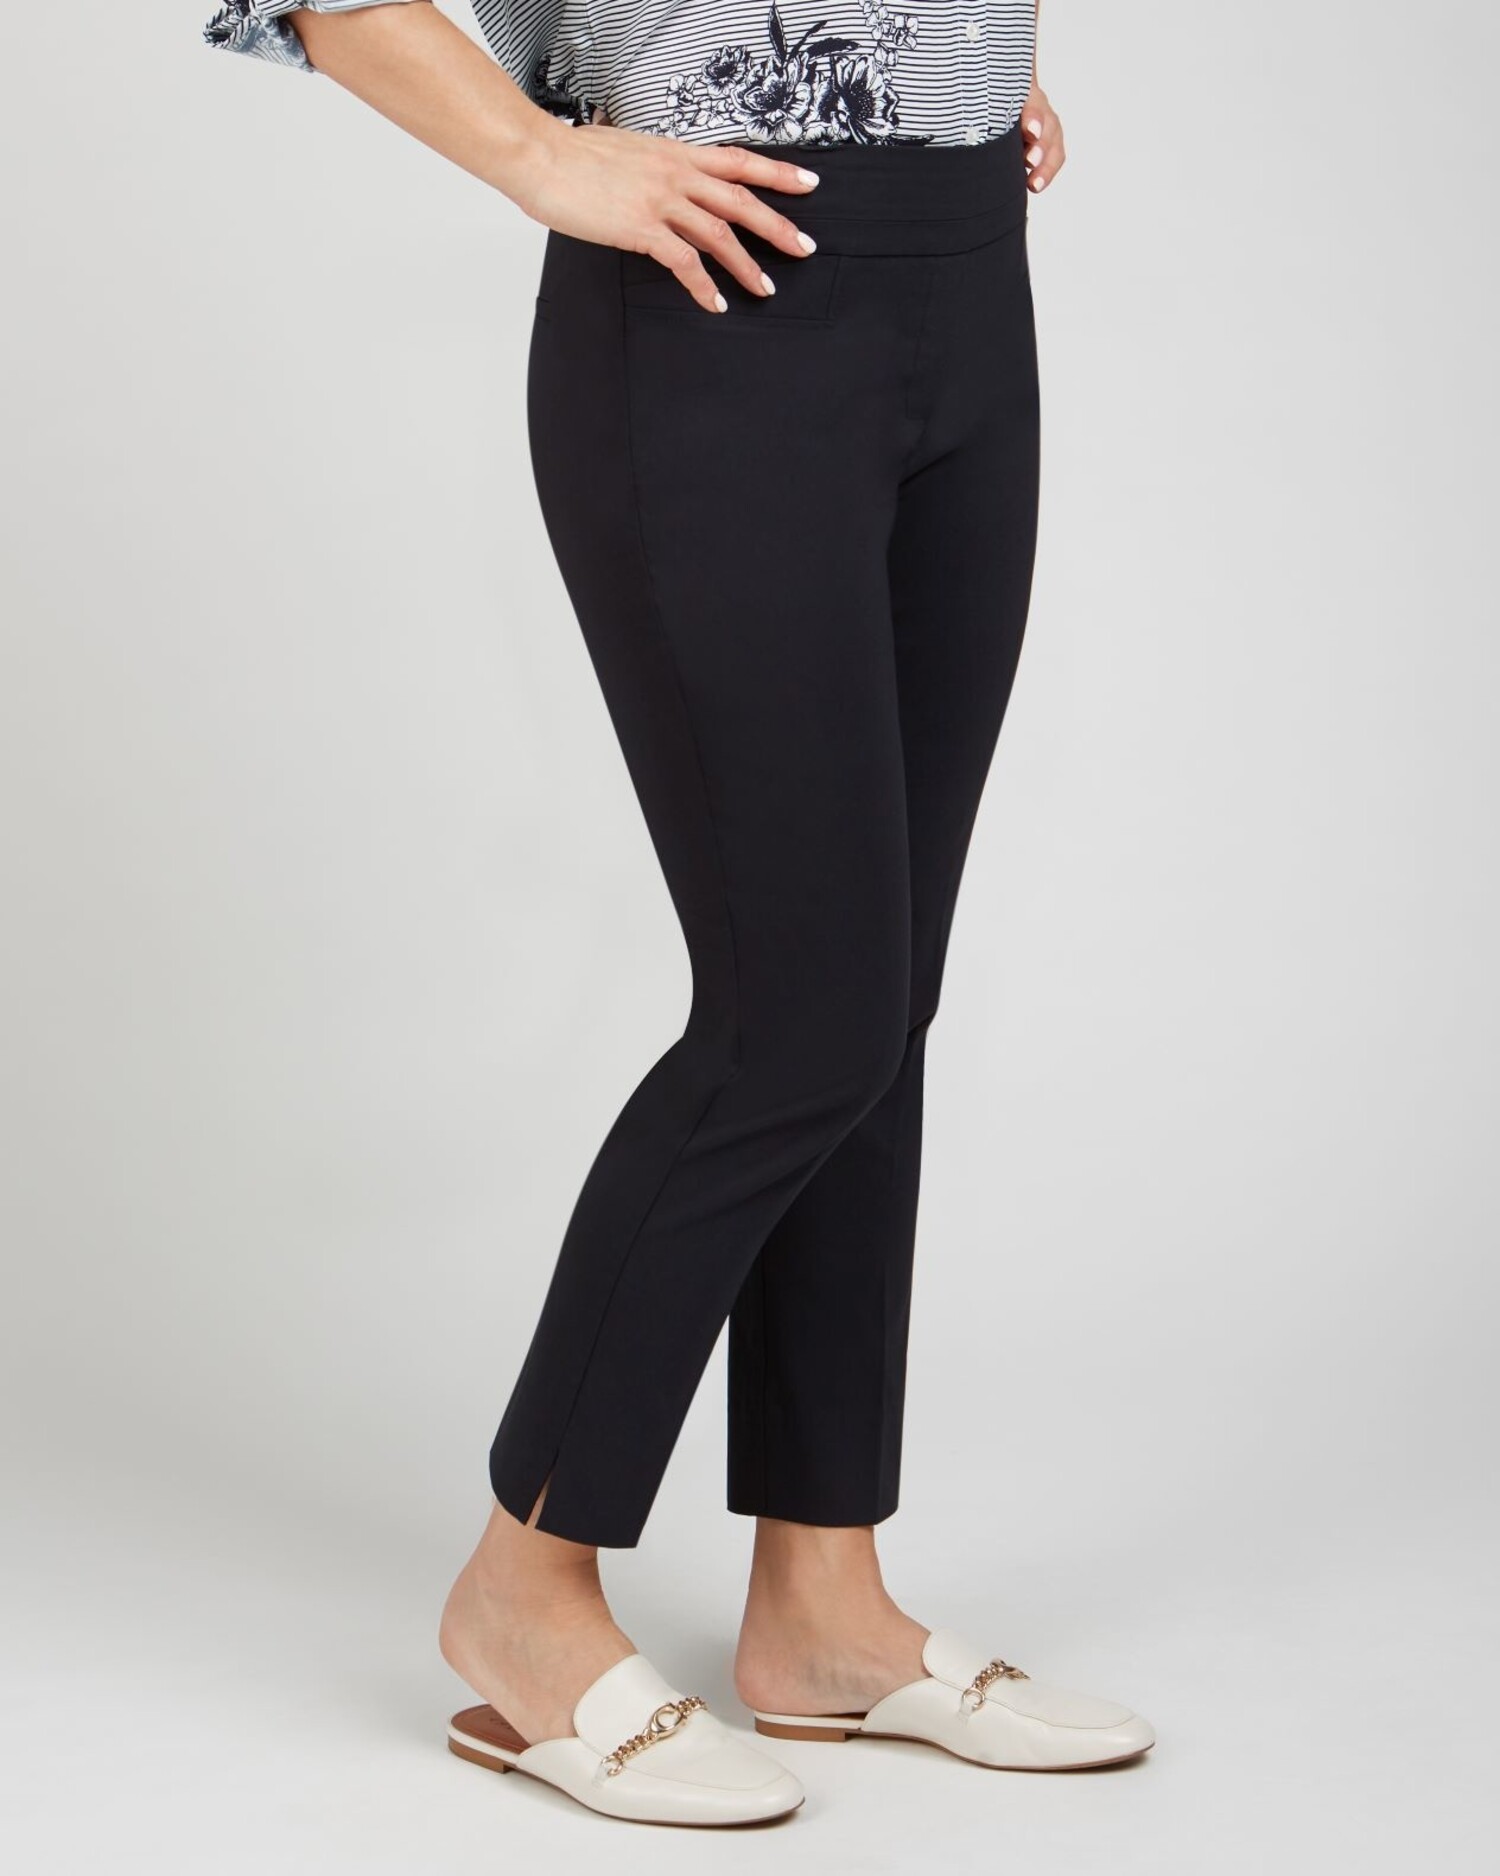 Buy Gray Ankle Length Pant Rayon for Best Price, Reviews, Free Shipping